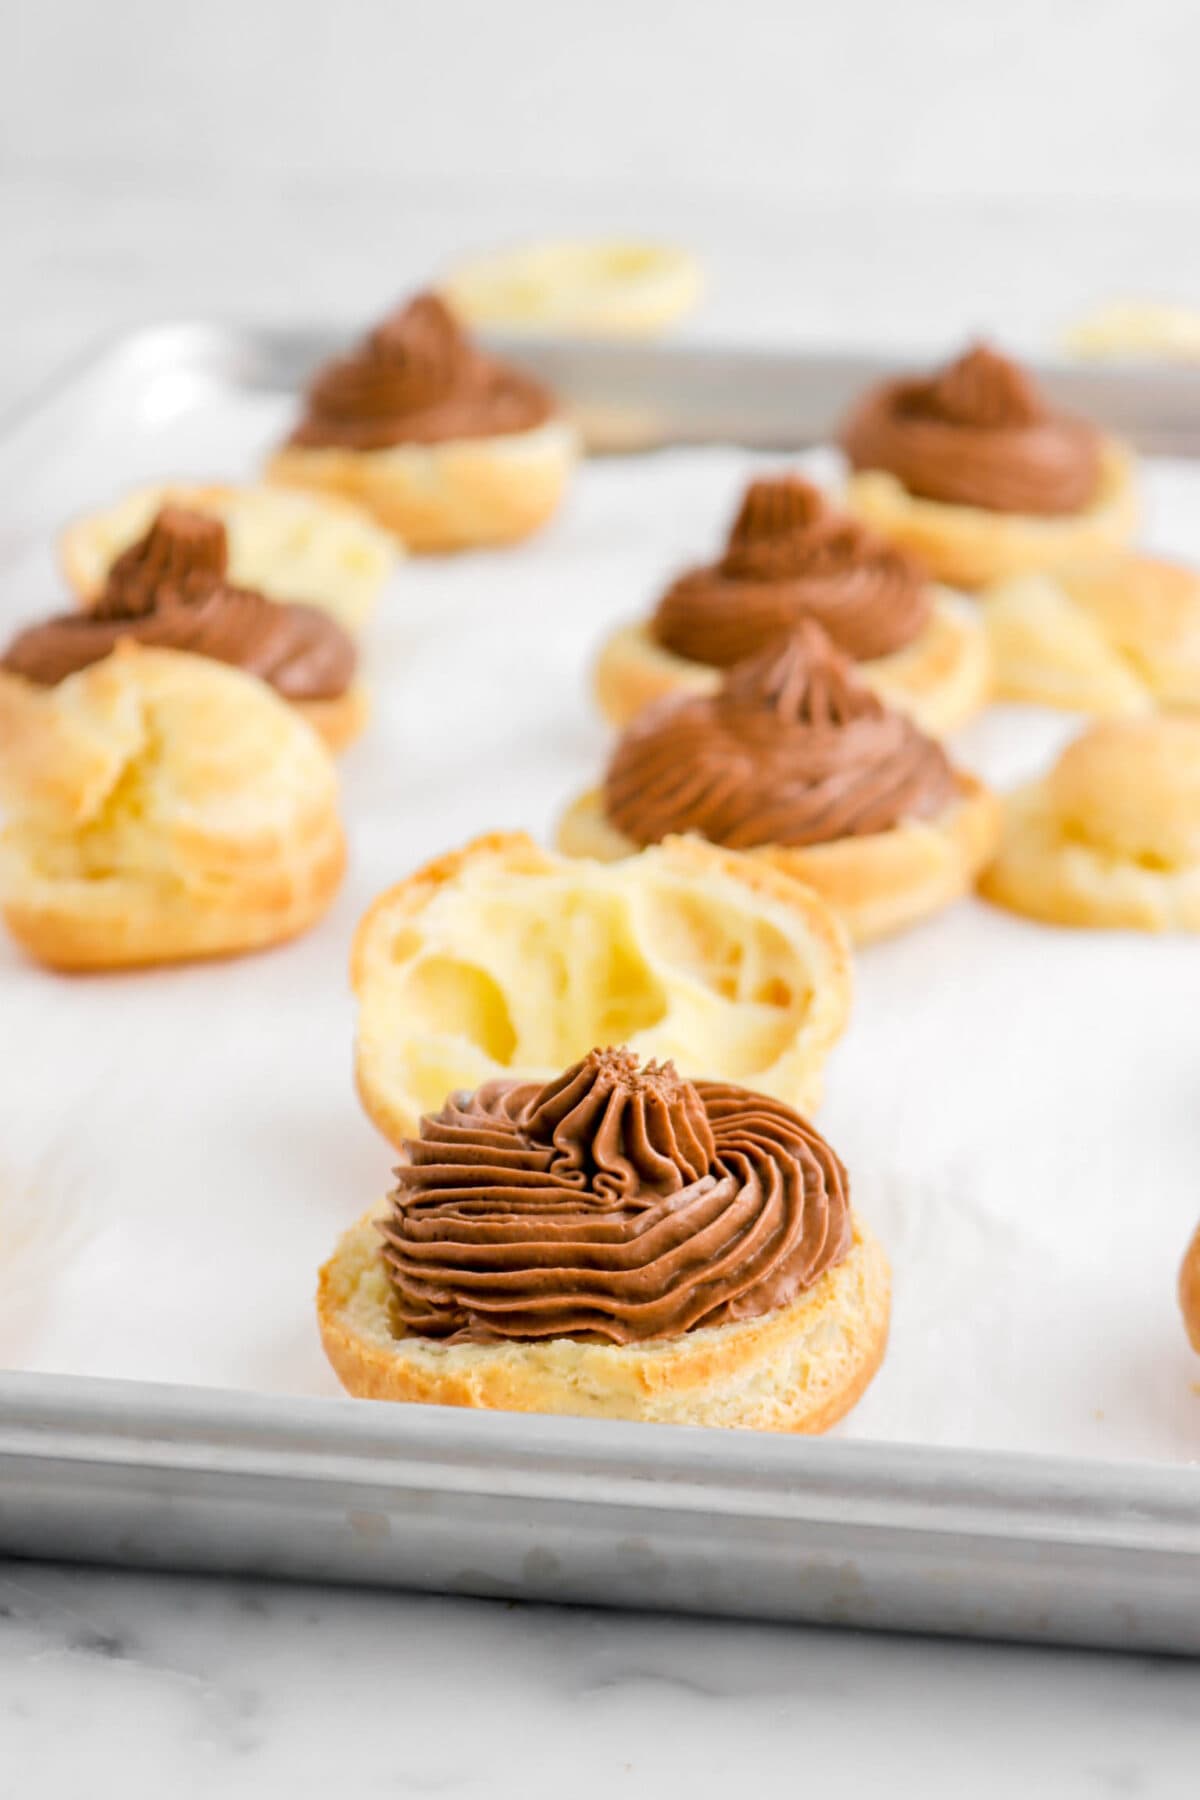 chocolate mousse piped into choux pastry